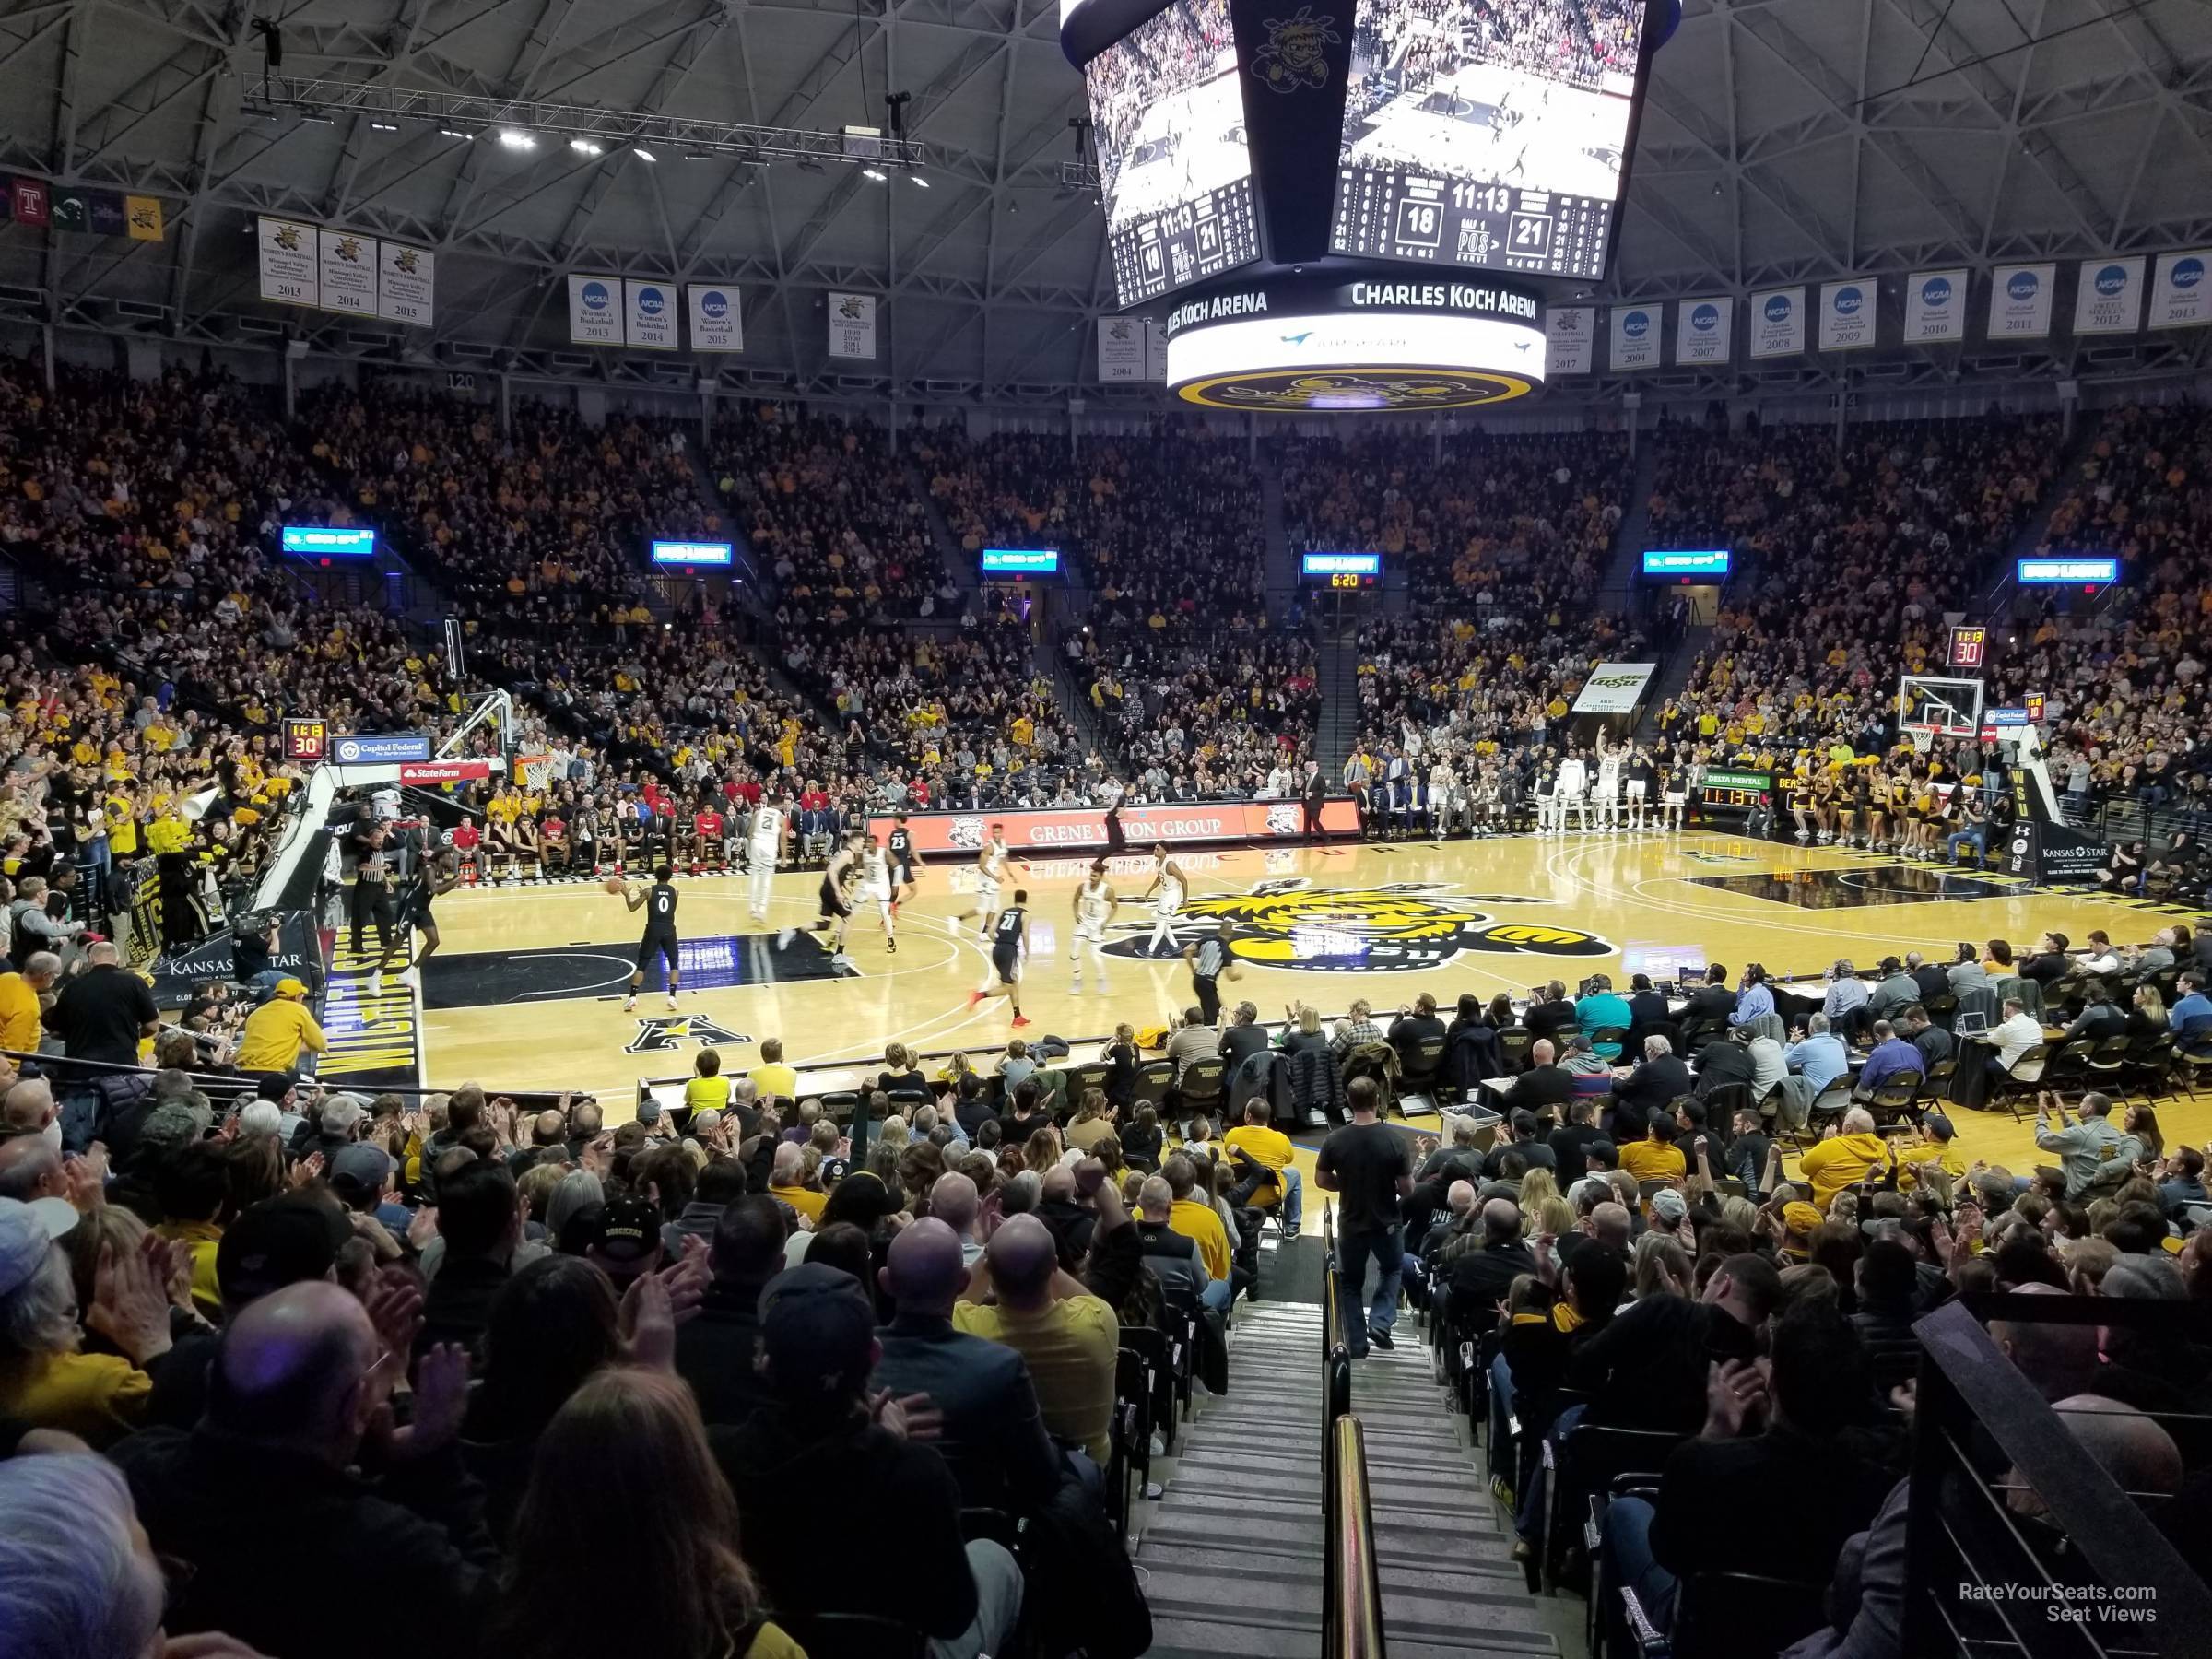 section 110, row 14 seat view  - charles koch arena